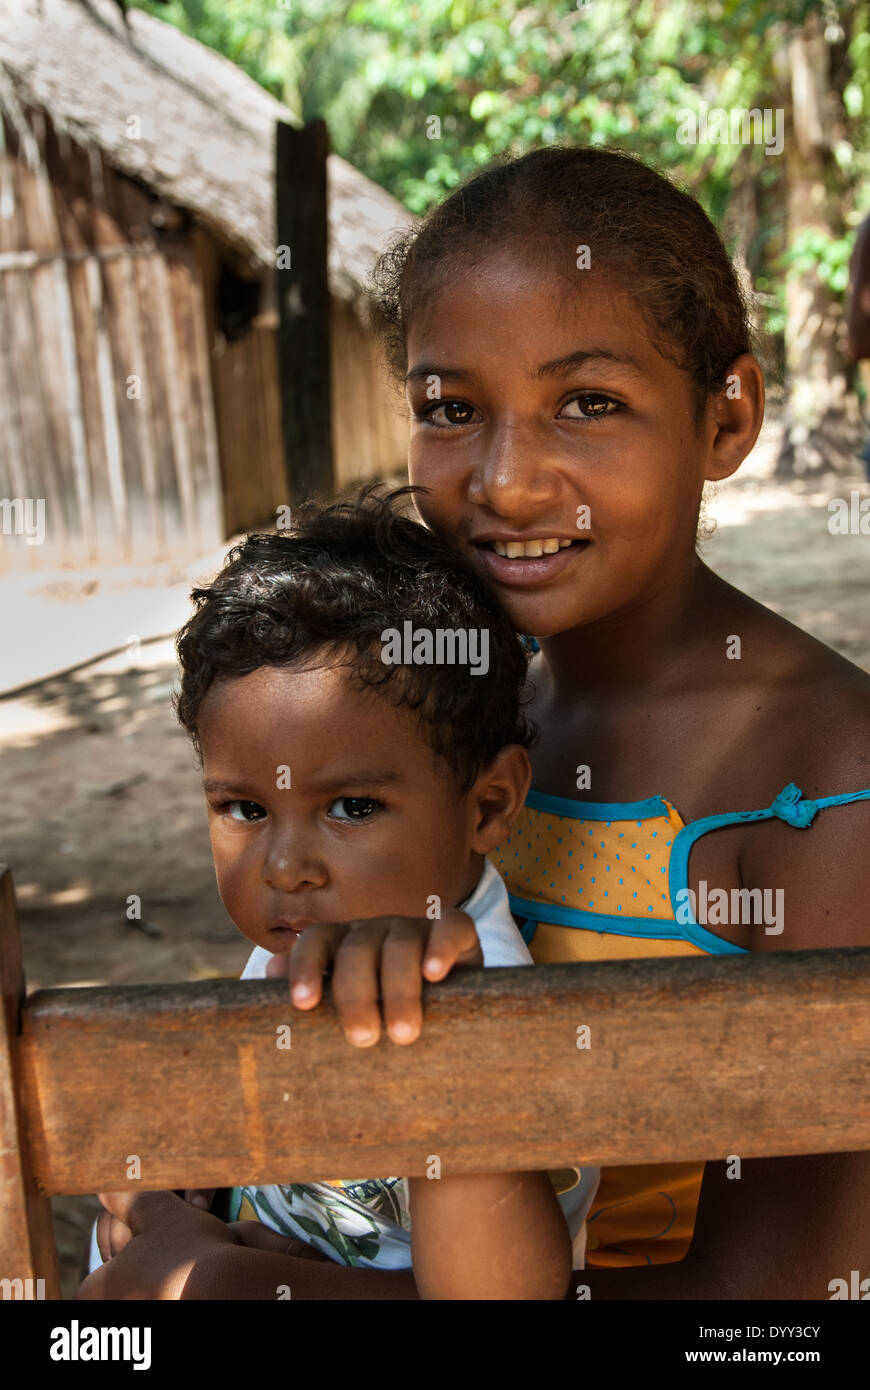 Pakissamba Village (Juruna), Xingu River, Para State, Brazil. A Juruna Indian girl and her brother. The Xingu River, which provides transport and fish for the Juruna, will be reduced to a trickle when the Belo Monte dam is built. Stock Photo